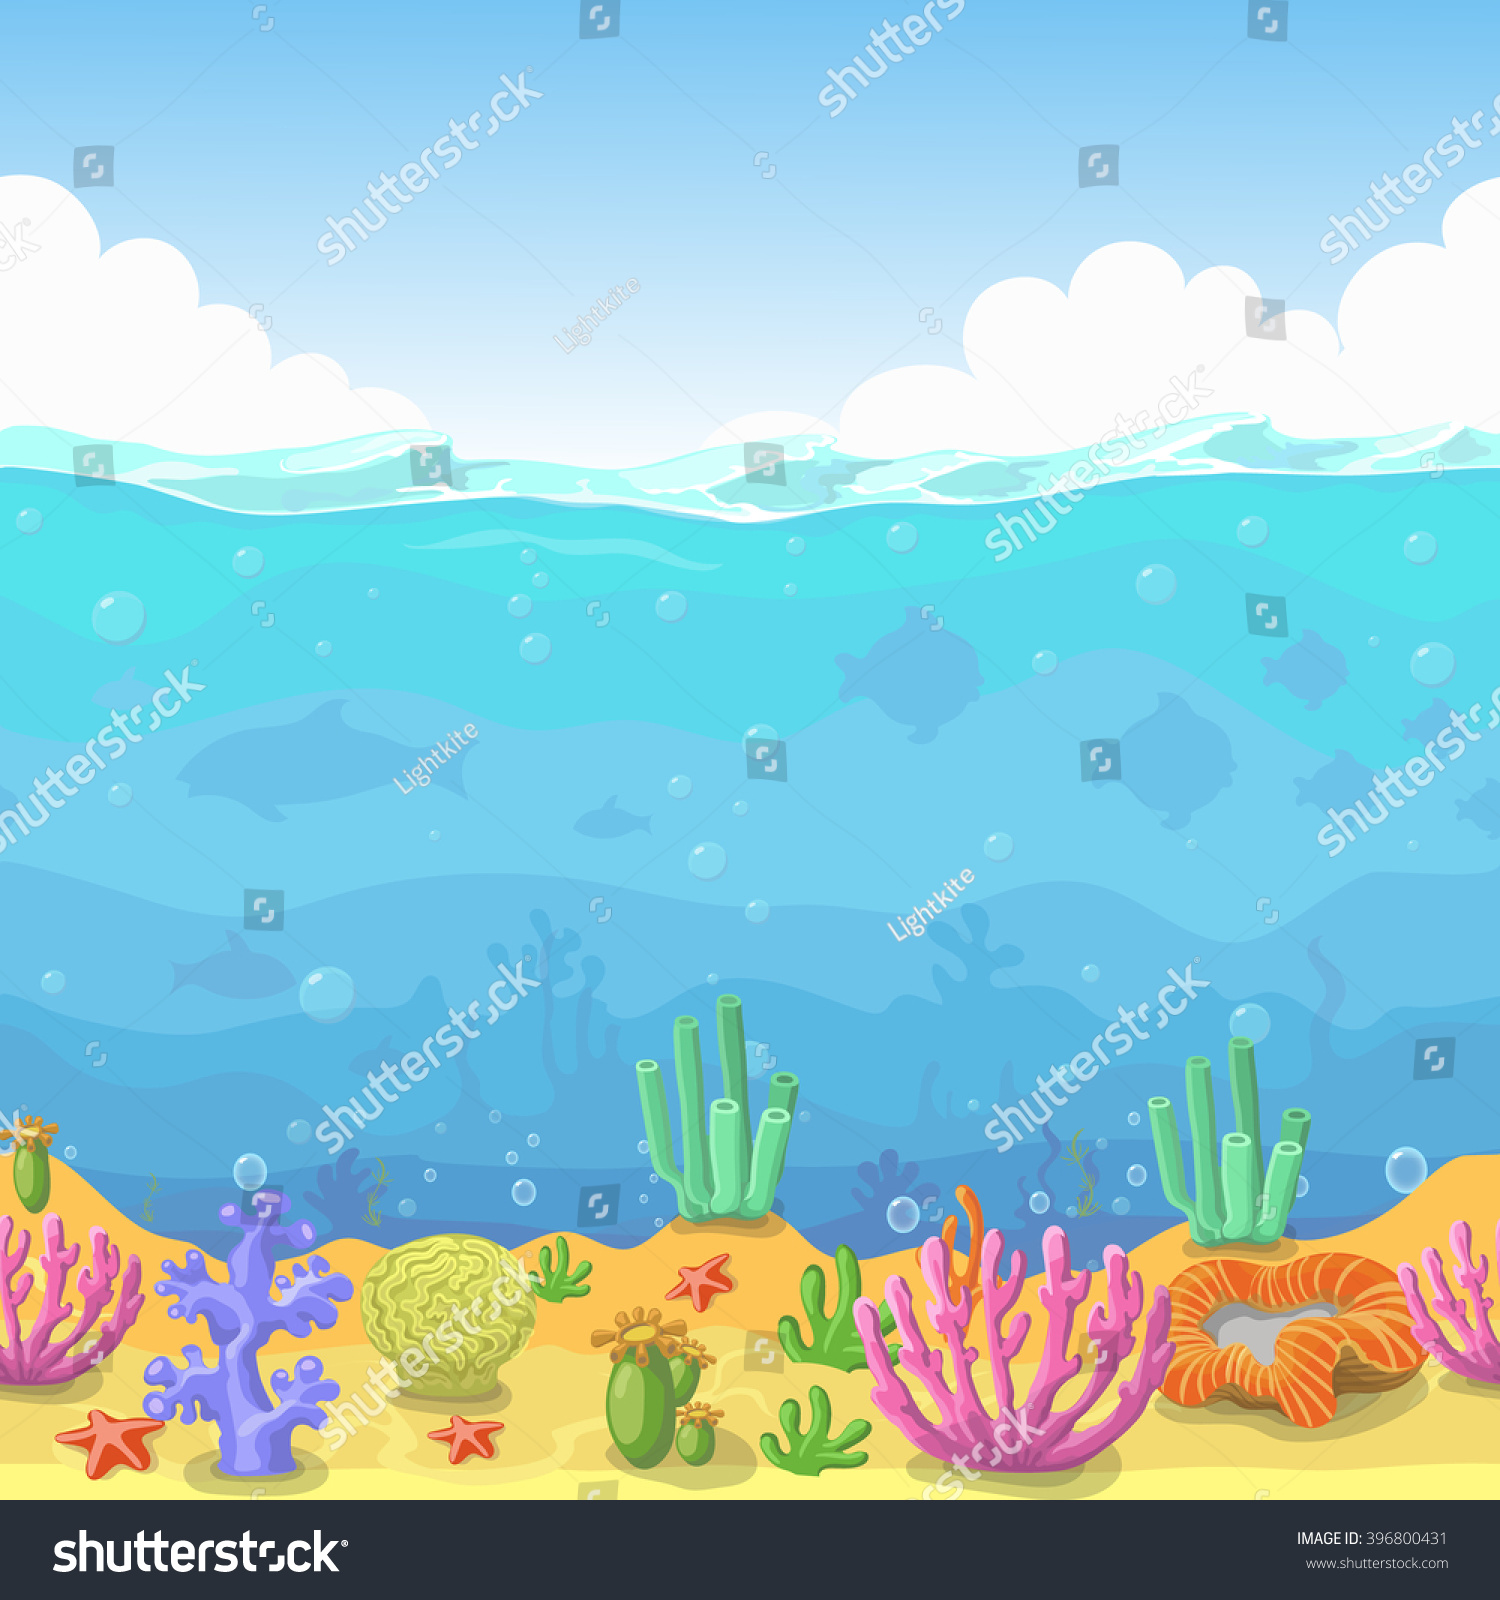 Seamless Underwater Landscape In Cartoon Style. Fish And Coral. Vector ...